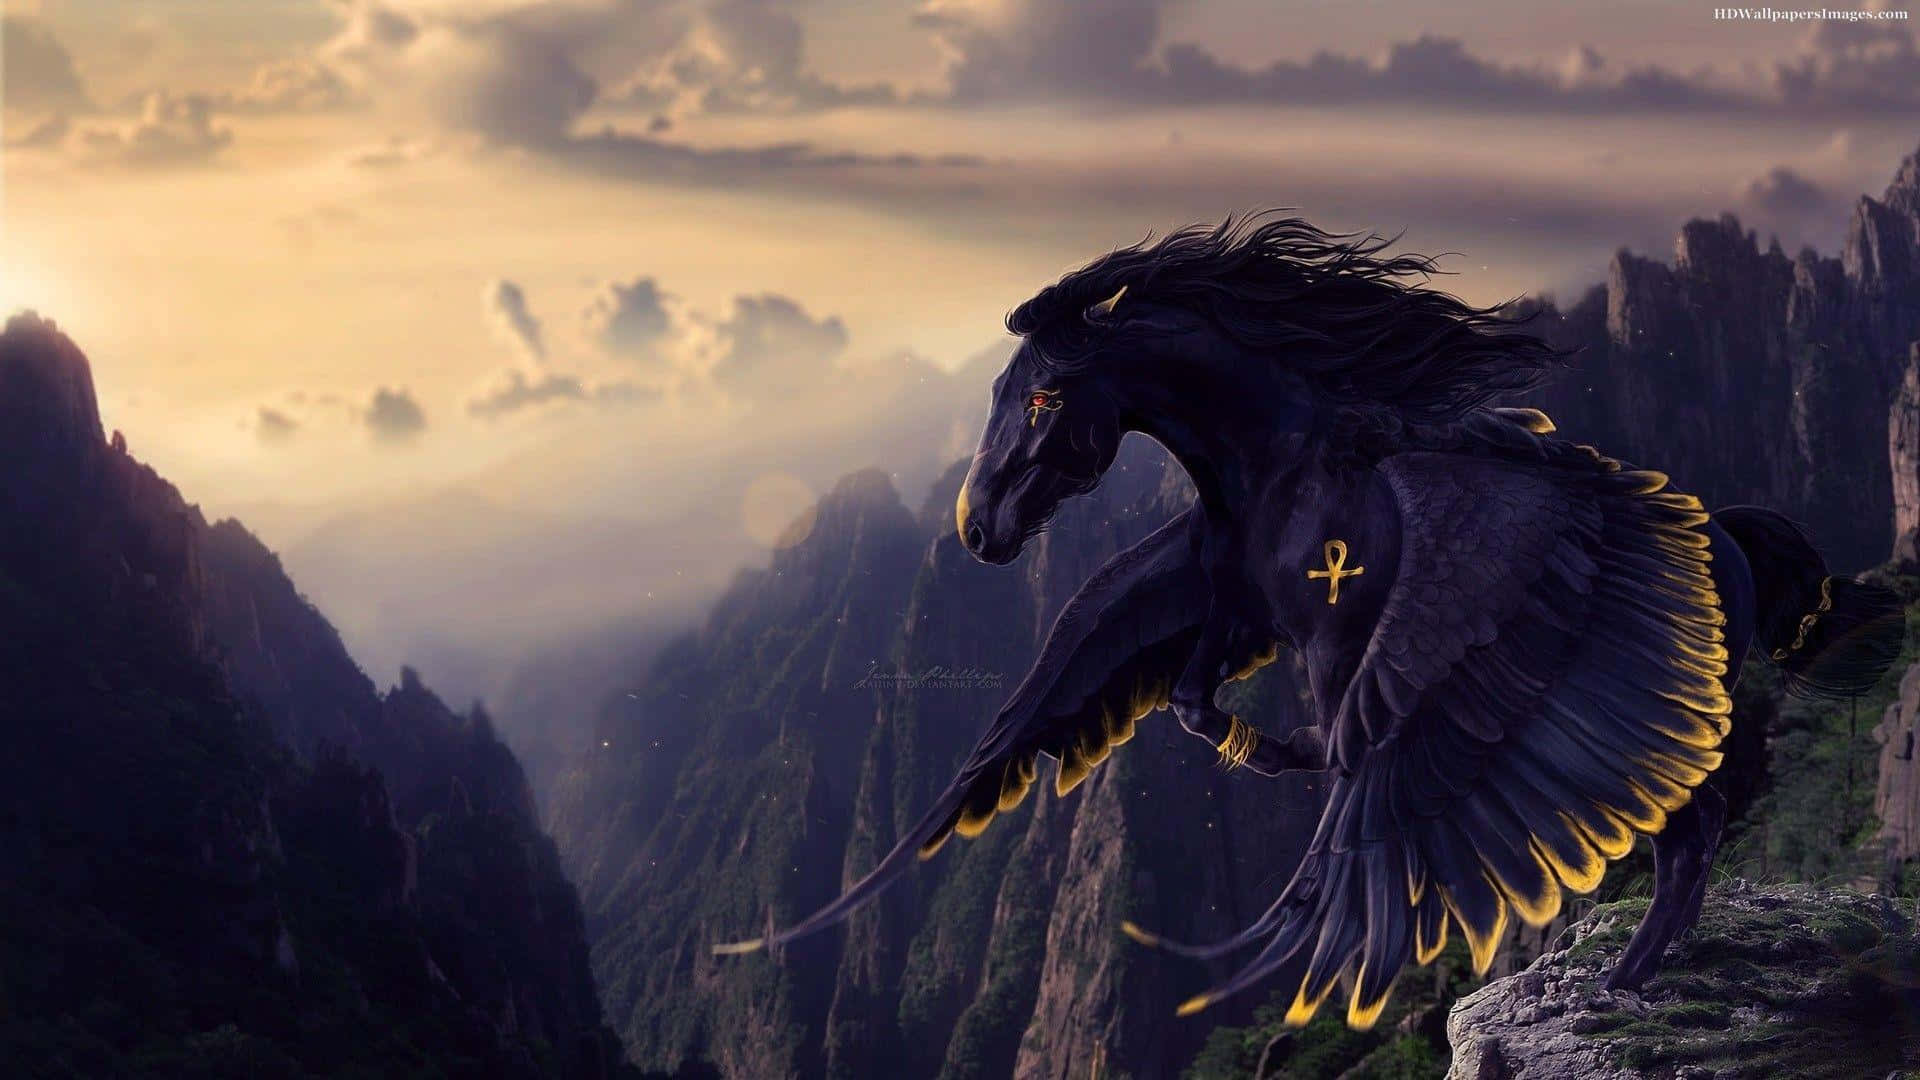 "A solitary black horse gracefully trotting through the wild grass."